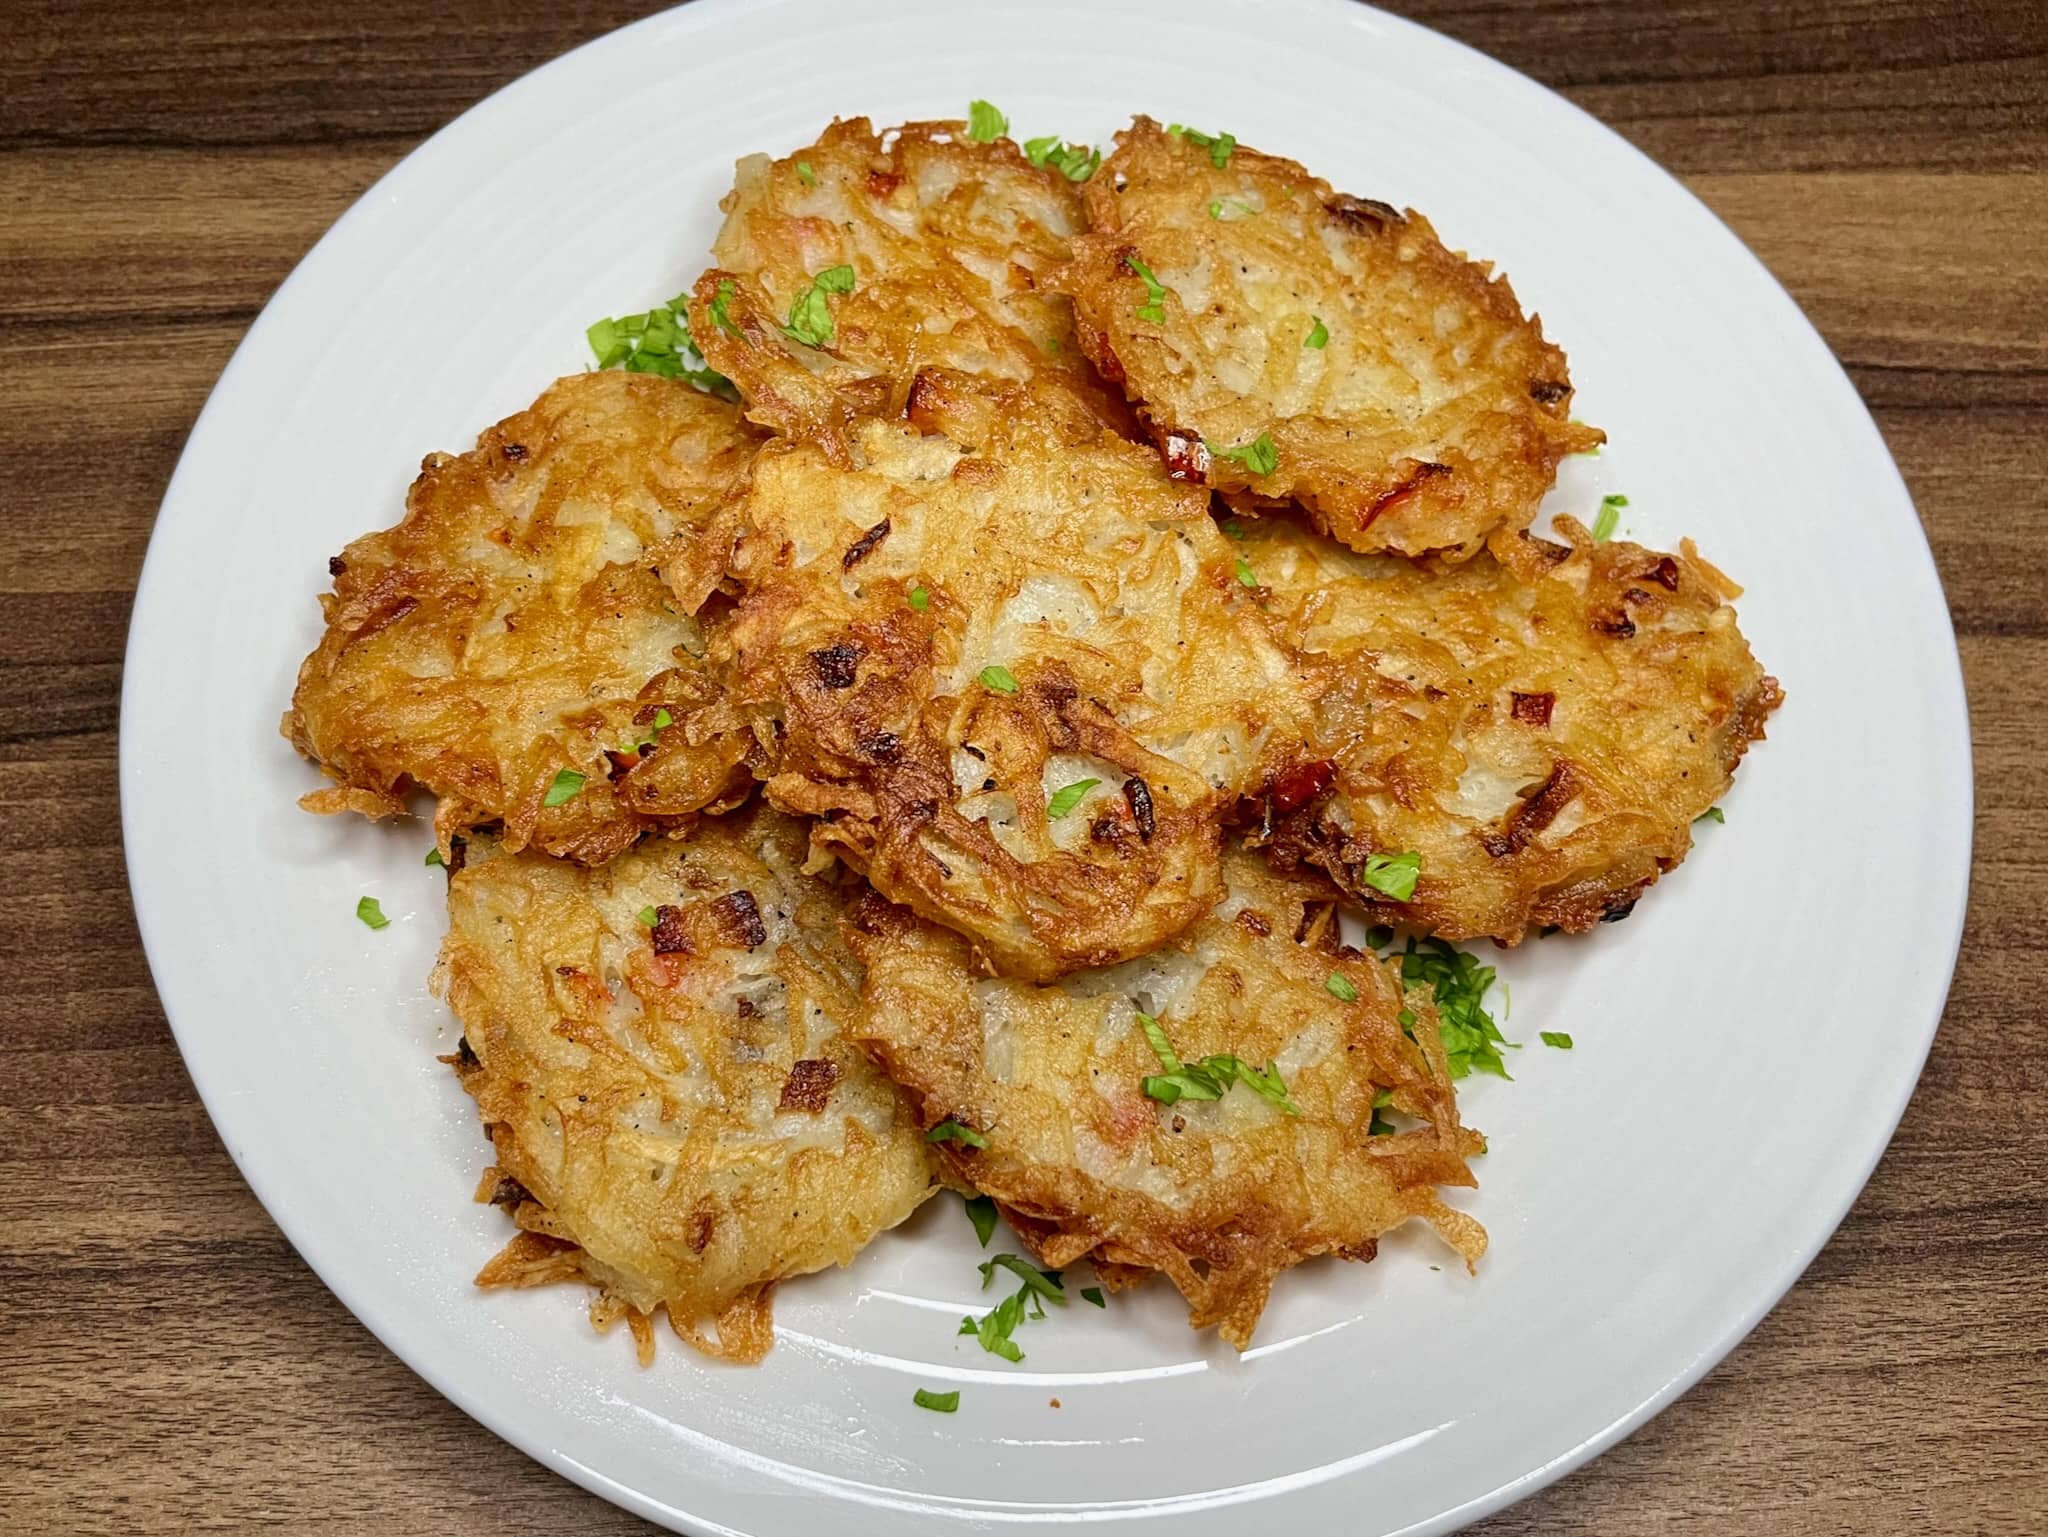 Golden brown Polish-style potato pancakes are neatly arranged on a plate